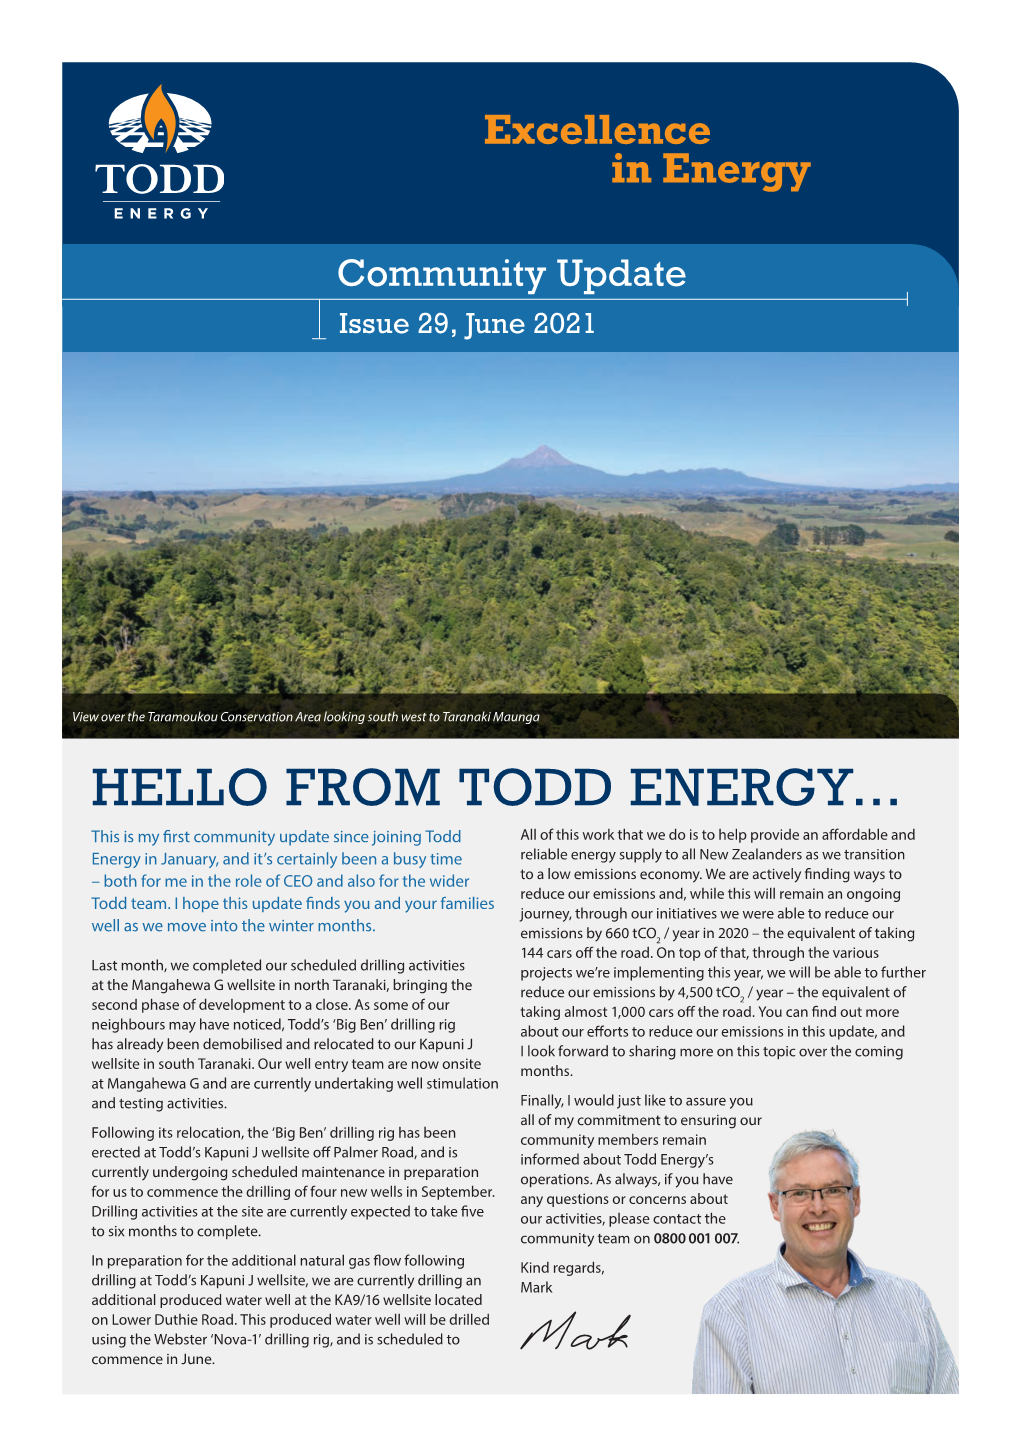 Hello from Todd Energy